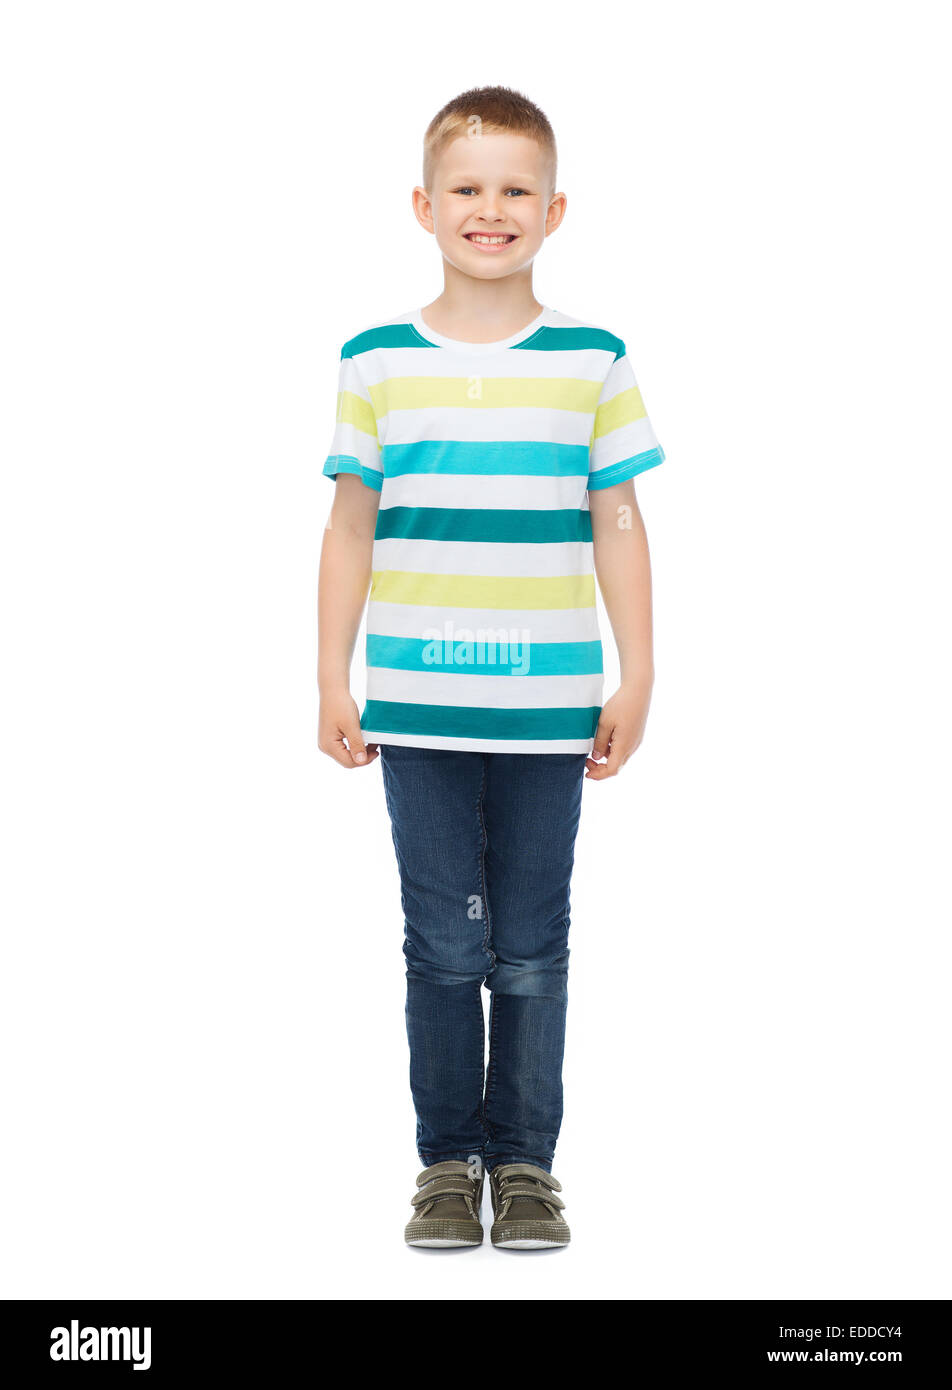 little boy in casual clothes Stock Photo - Alamy